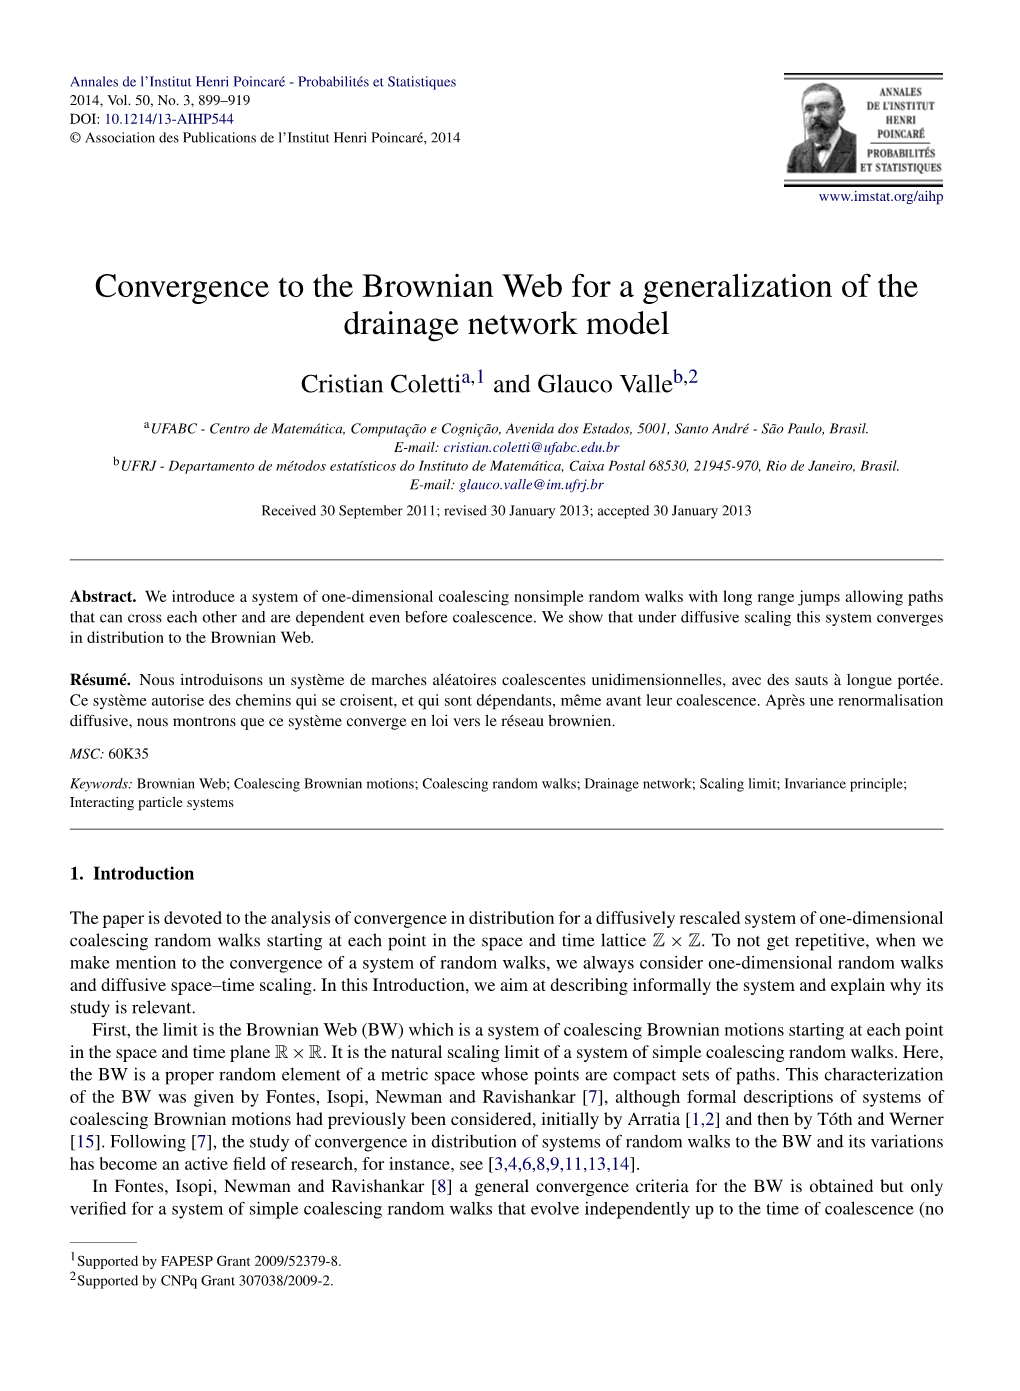 Convergence to the Brownian Web for a Generalization of the Drainage Network Model